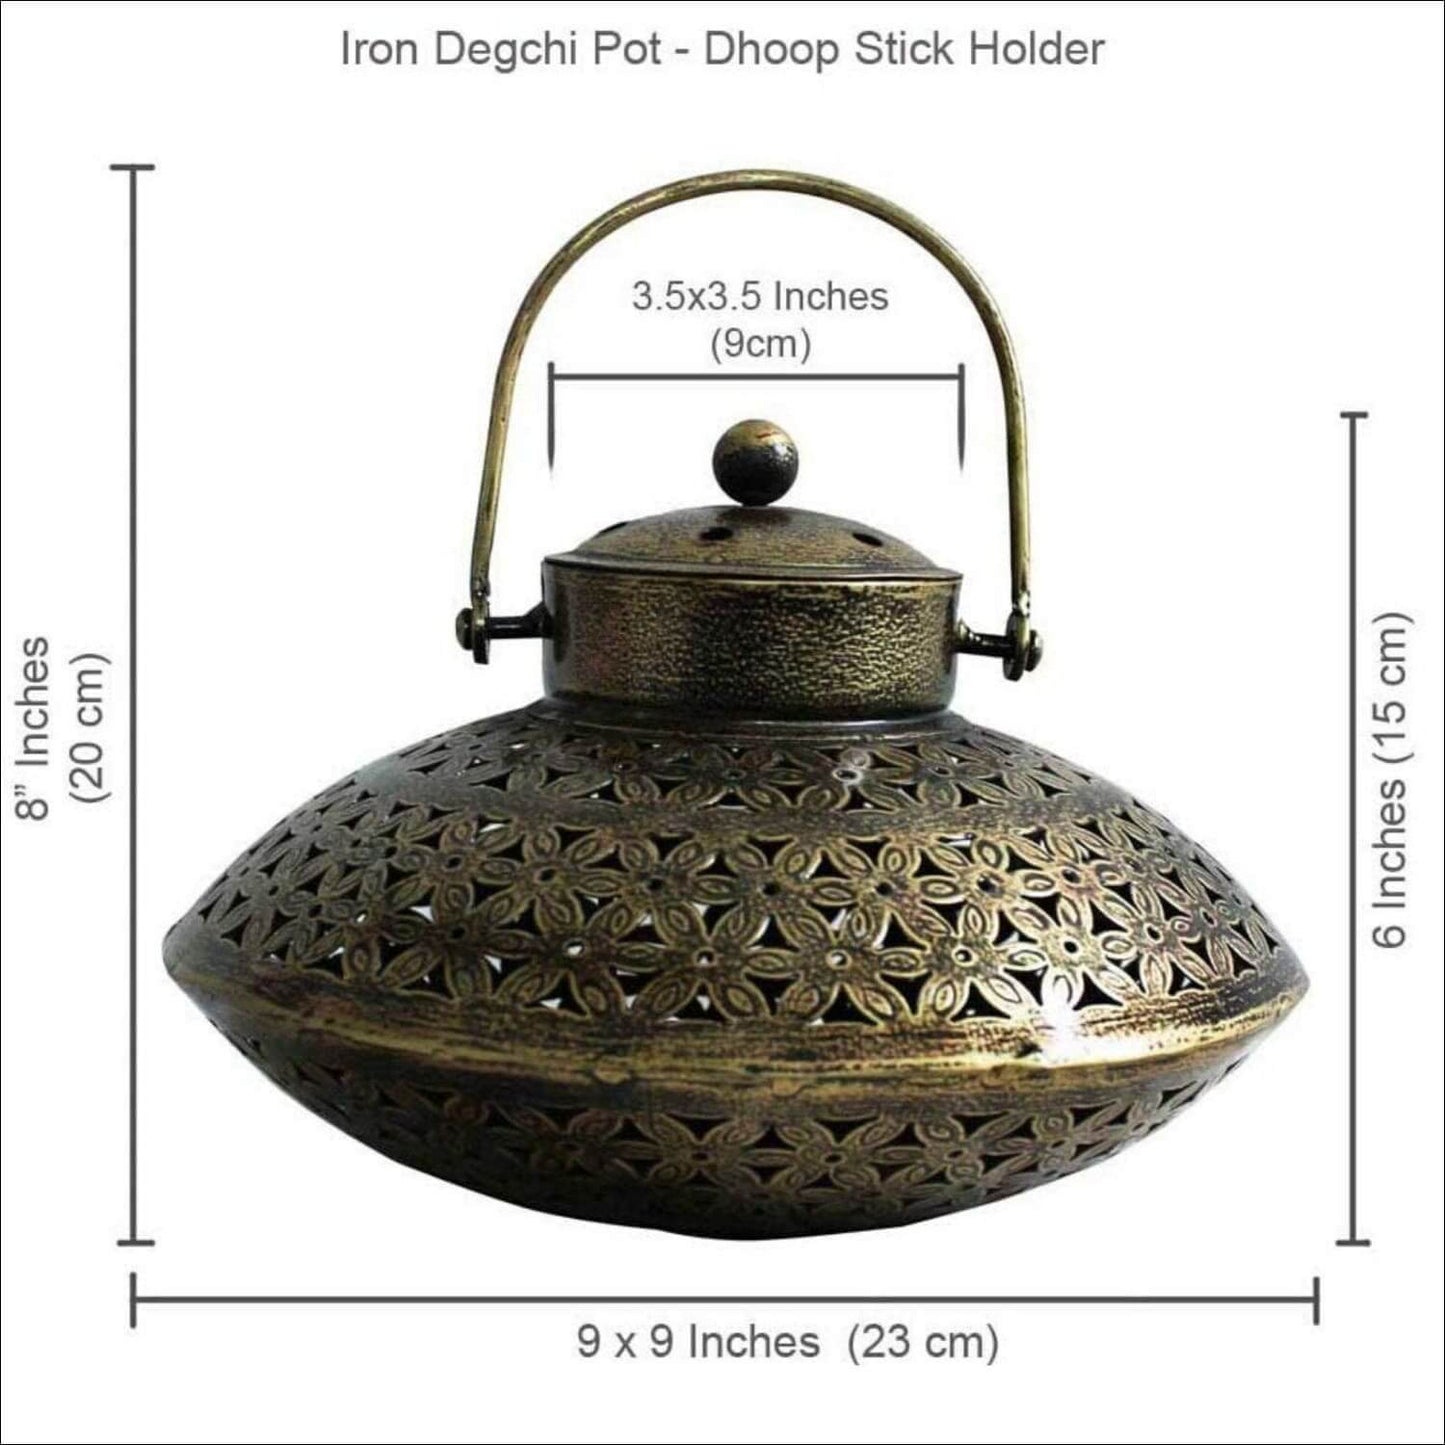 Cast Iron Degchi Dhoop Holder and Tea Light Holder for Home with Wall Hanging Stand and Brass Bells (9(L) x 9(B) x 6(H) inches, Antique Golden Brown)(Round)